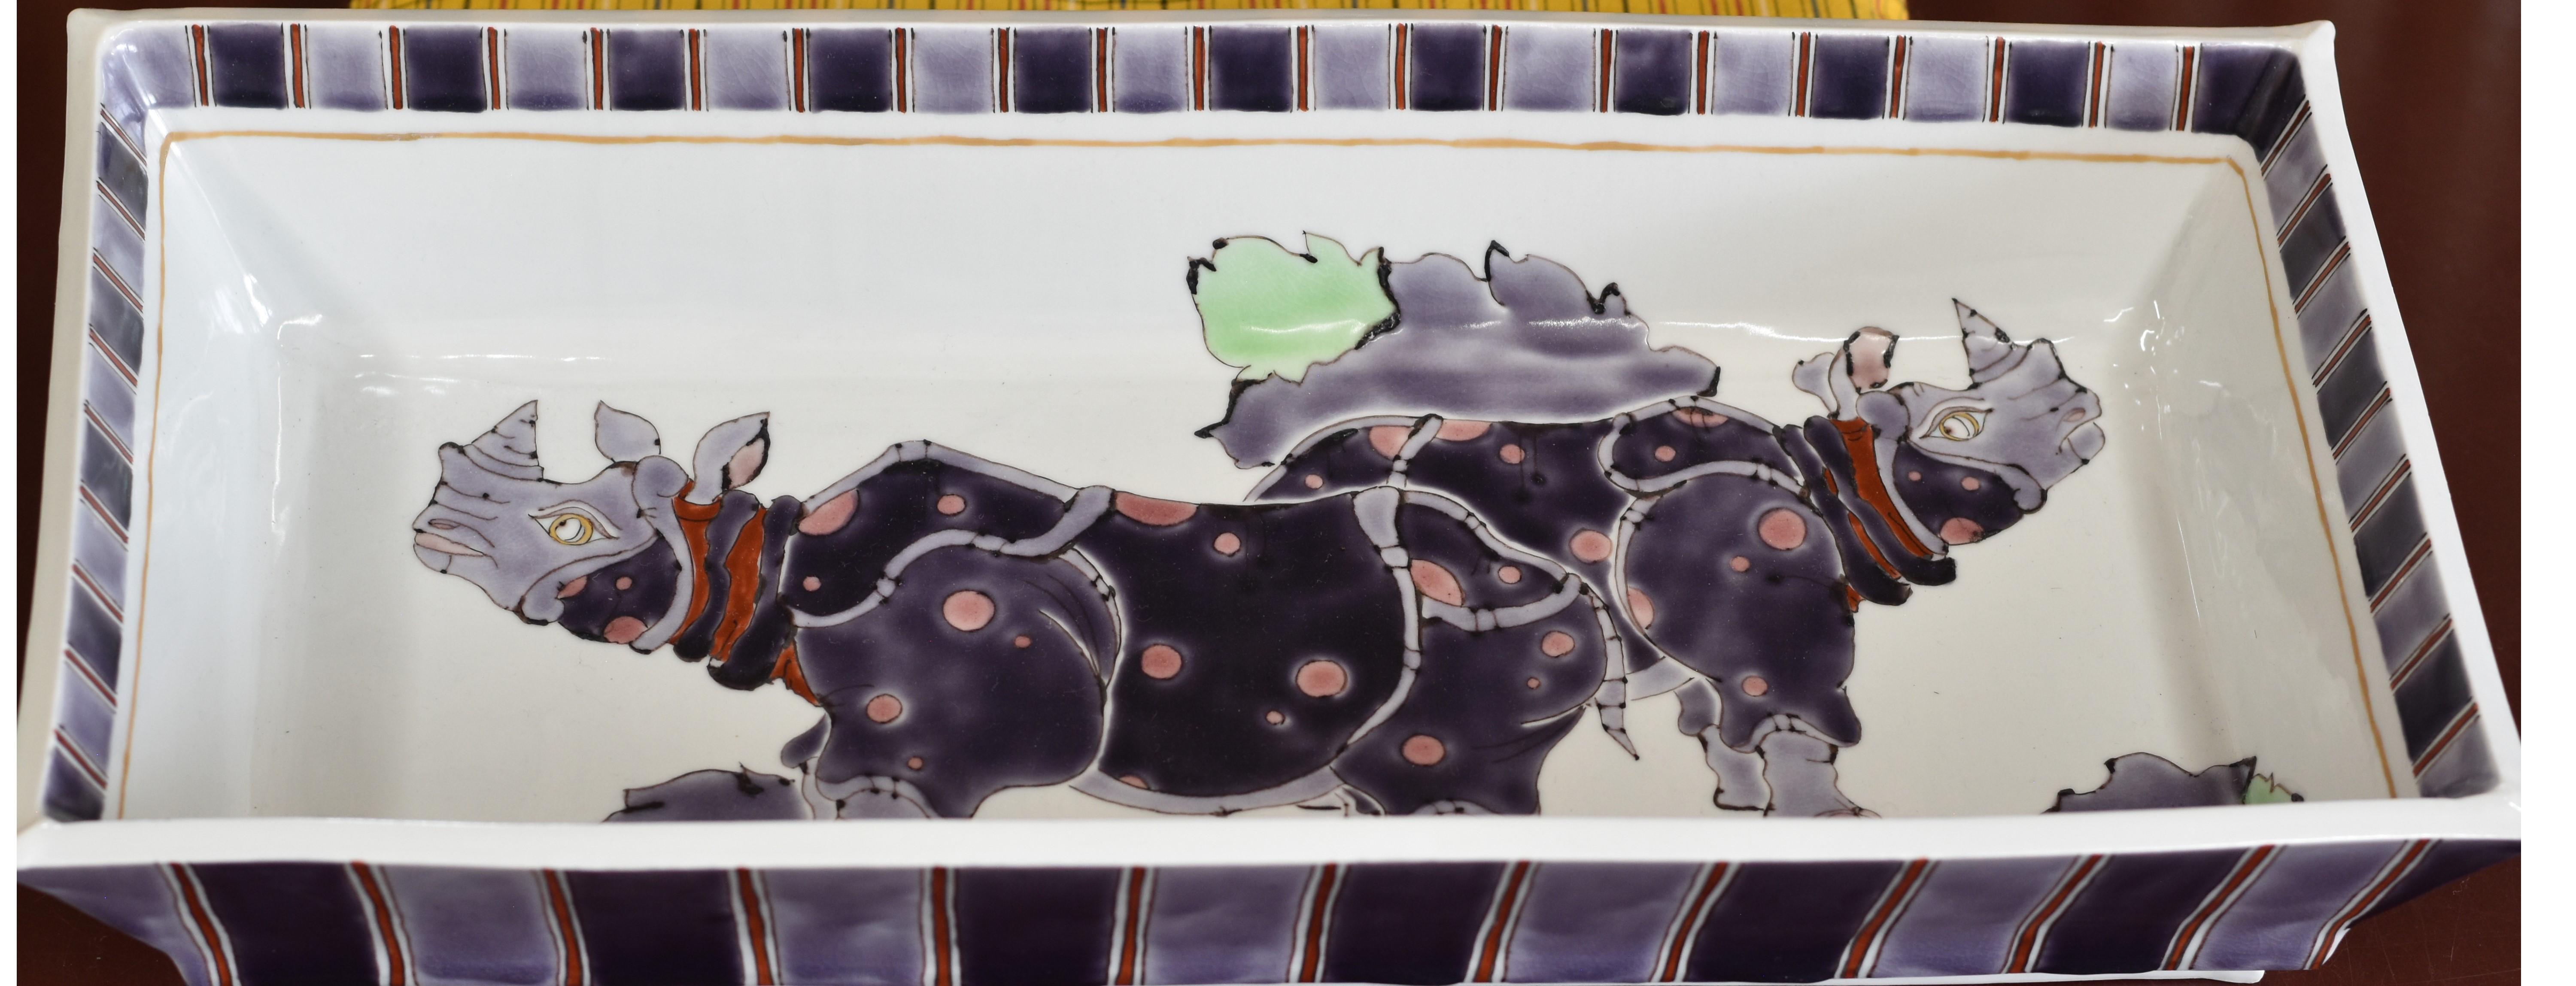 Extraordinary museum quality Japanese contemporary signed decorative porcelain deep charger, dramatically hand painted on an elegant rectangular body in vivid hues of purple, red and gray, with a unique interpretation of rhinoceros. This highly